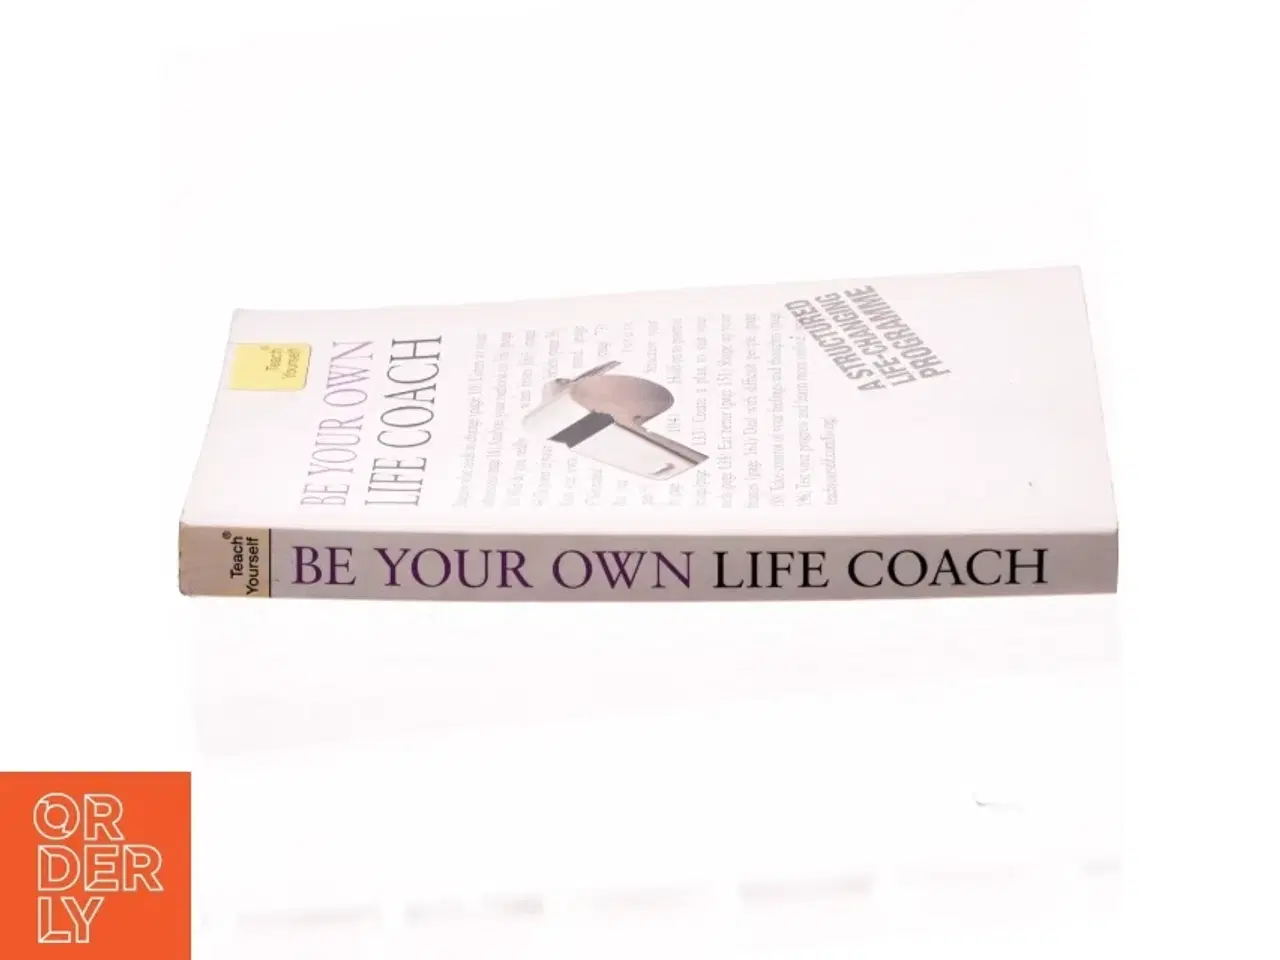 Billede 2 - Be your own life coach